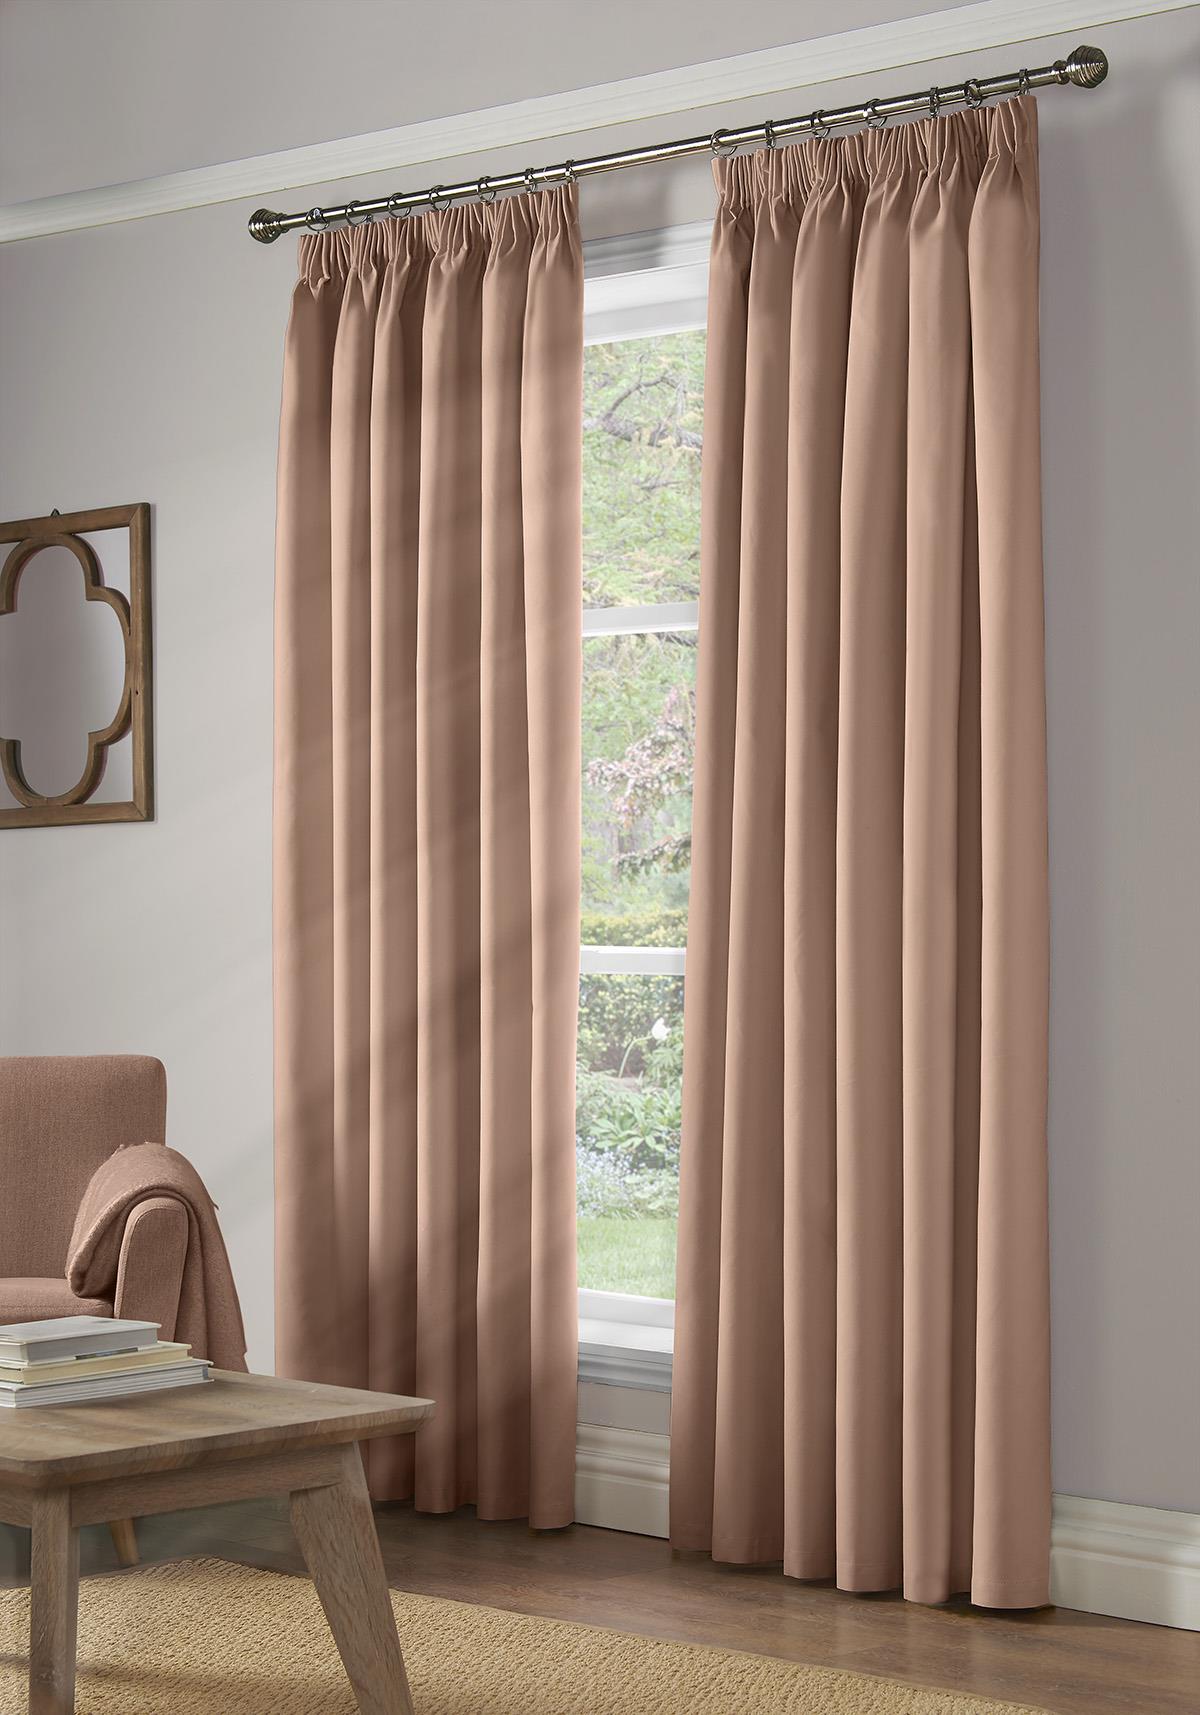 Pink Blackout Thermal Taped Curtains - Pair